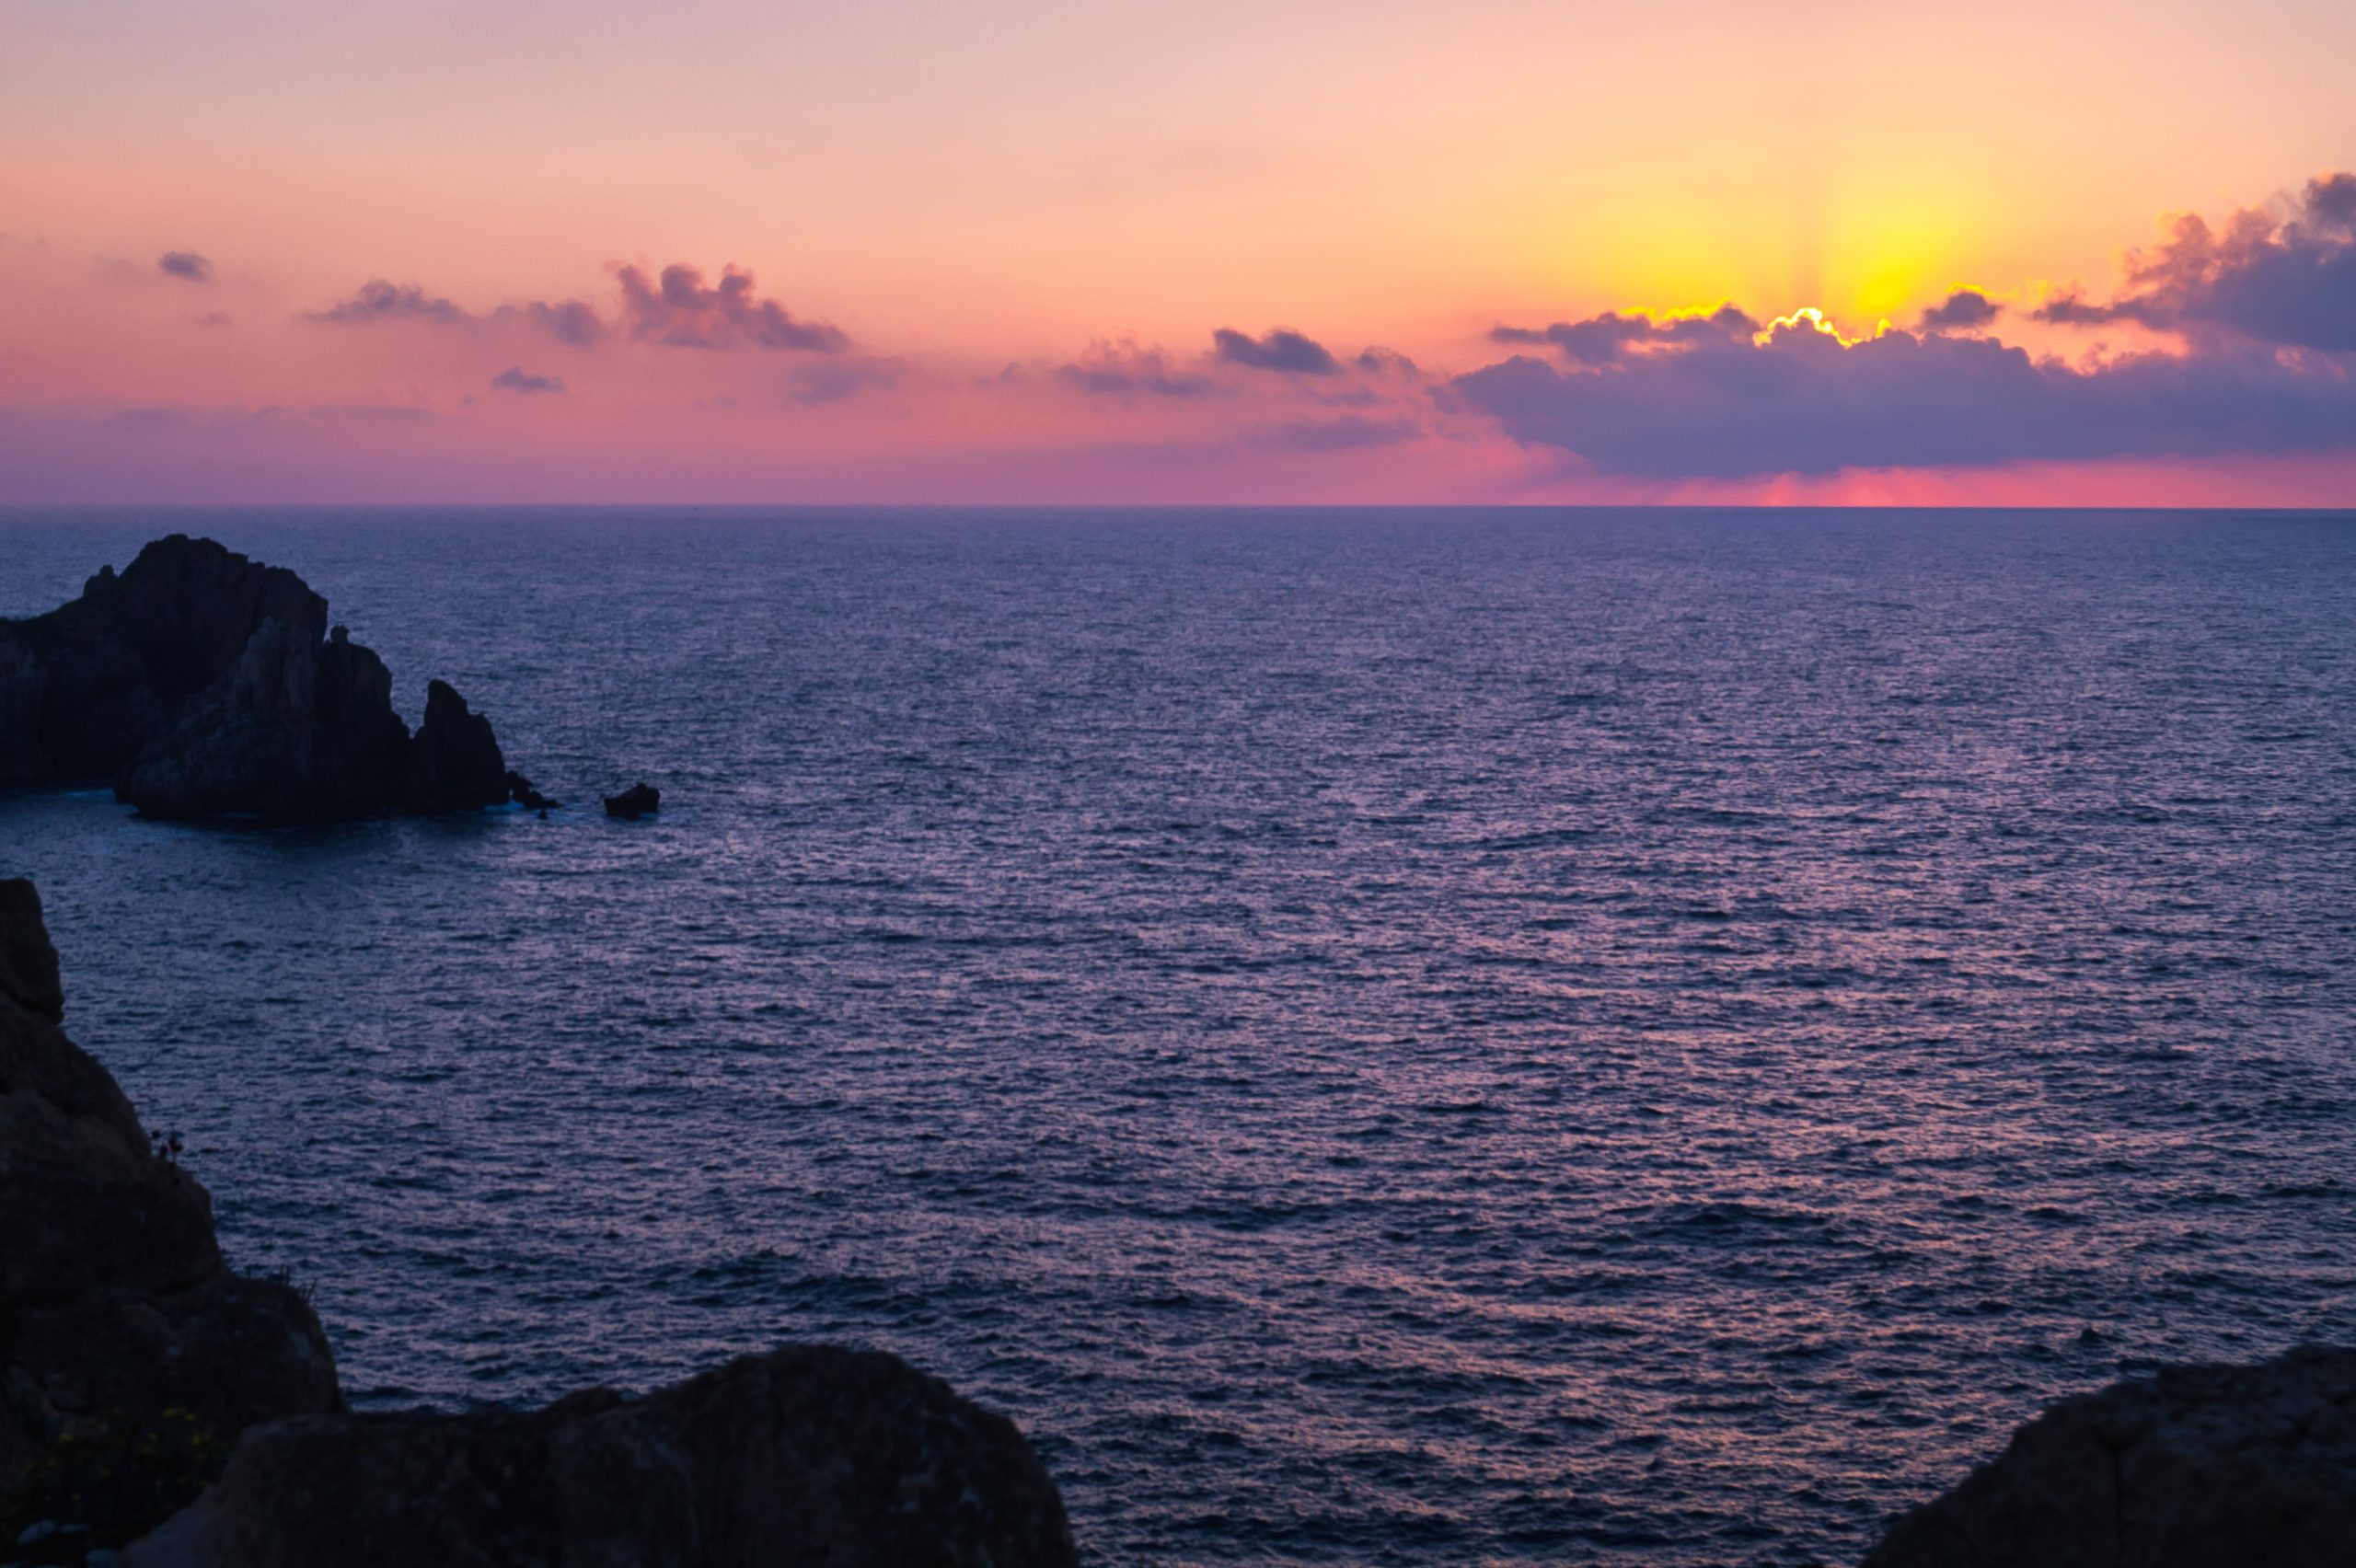 Sunset with sun, clouds and calm sea on cliffs of Costa Quebrada